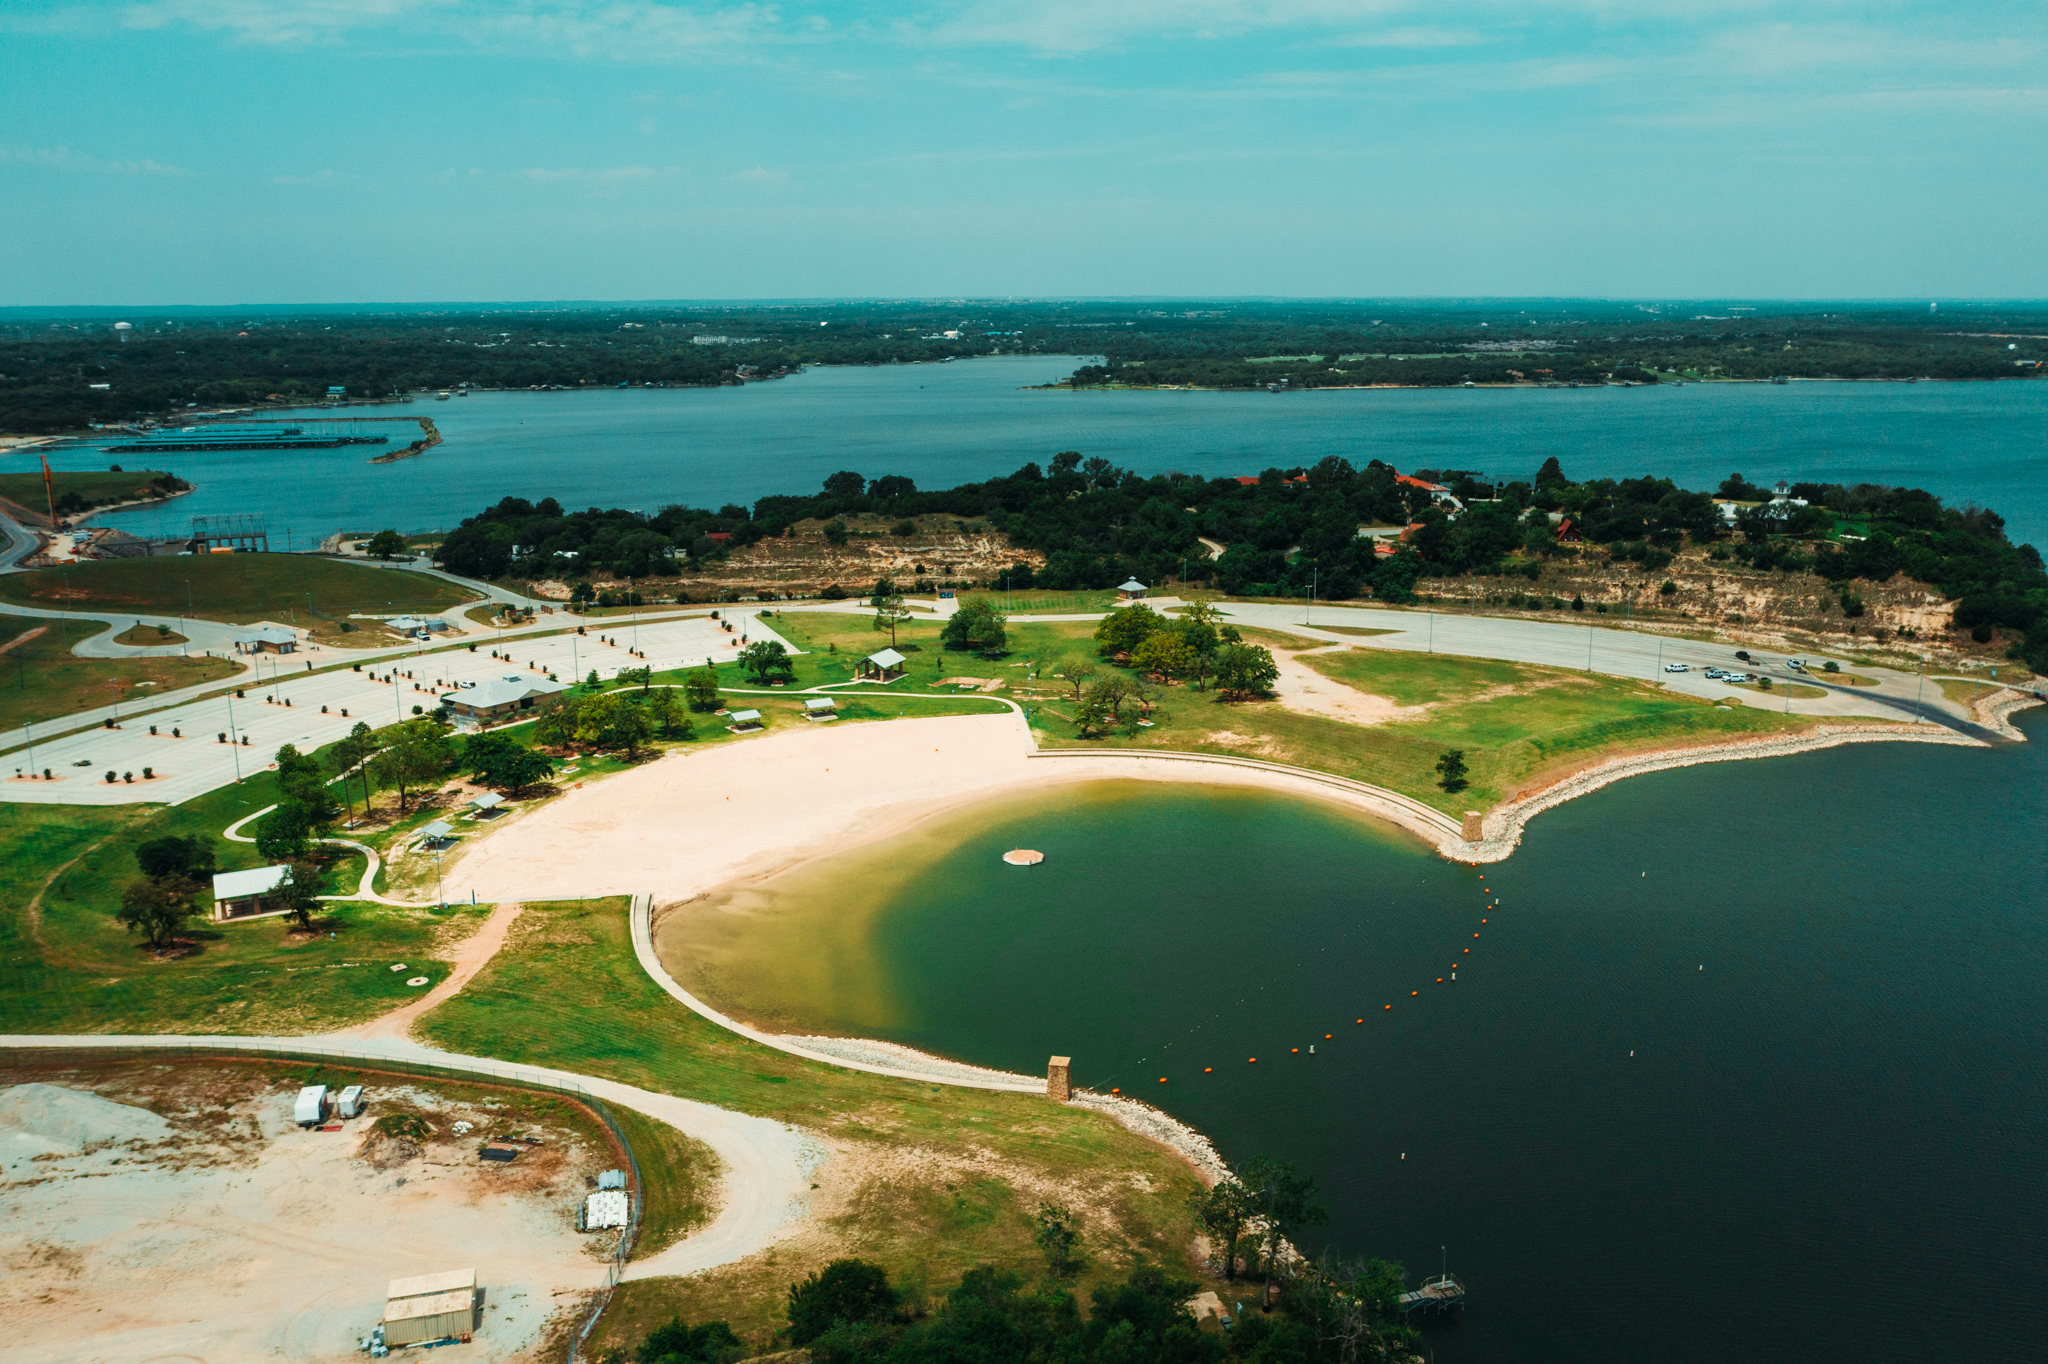 Create your favorite summer memories at Twin Points Park